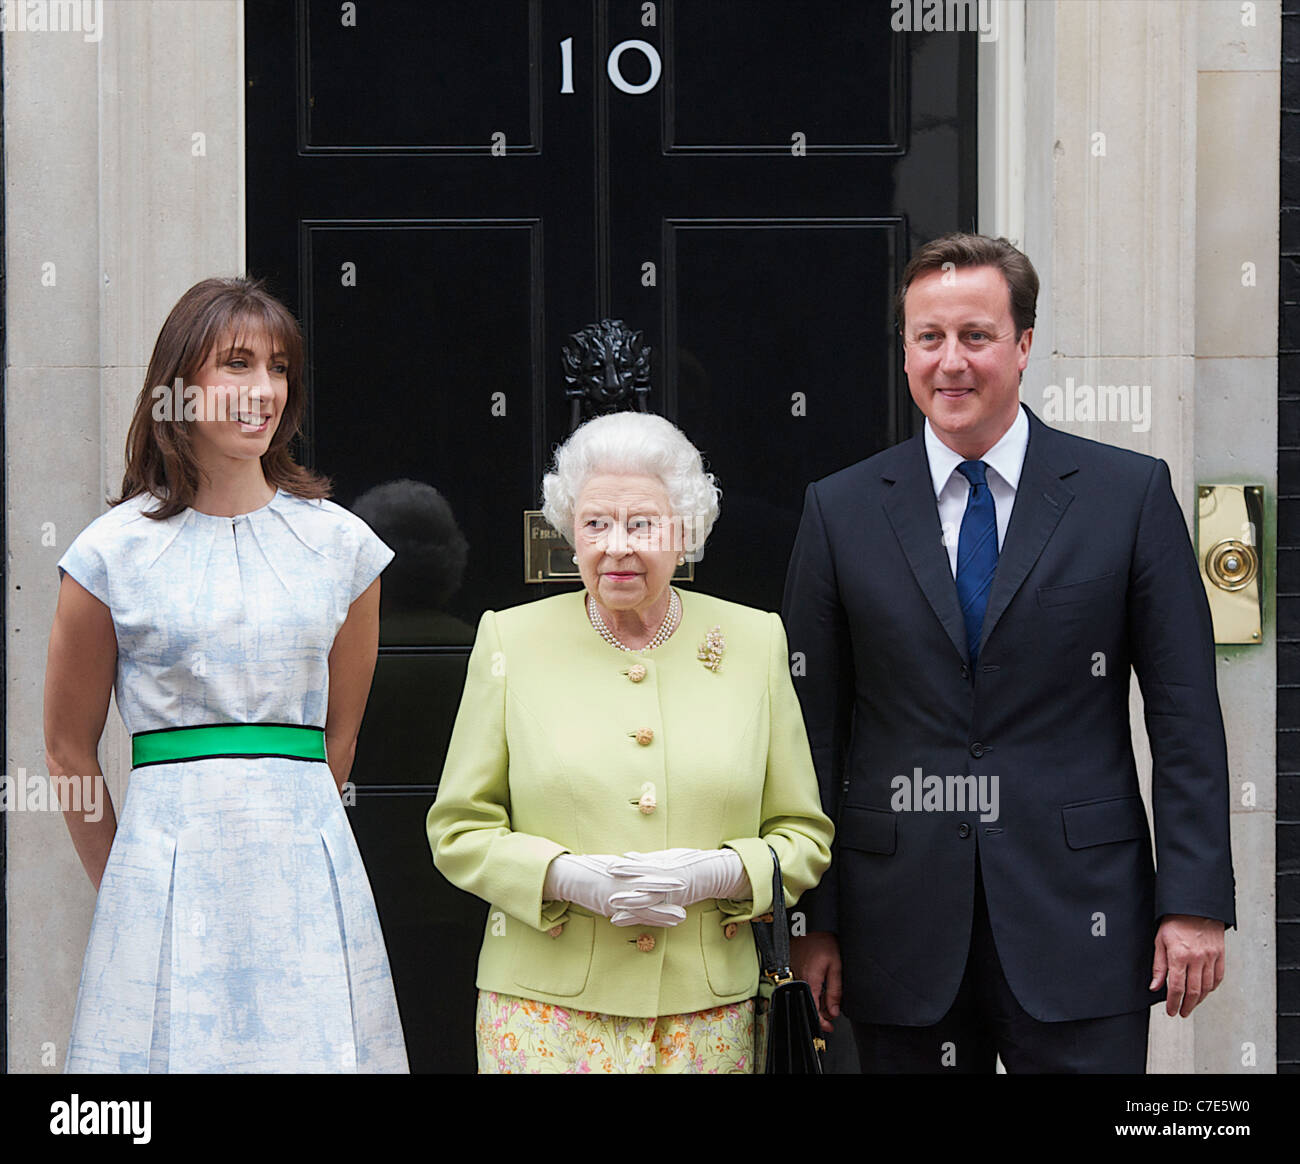 HRH The Queen and Duke of Edinburgh meet David and Samantha Cameron out side ten Downing street to Celebrate his 90th Birthday Stock Photo